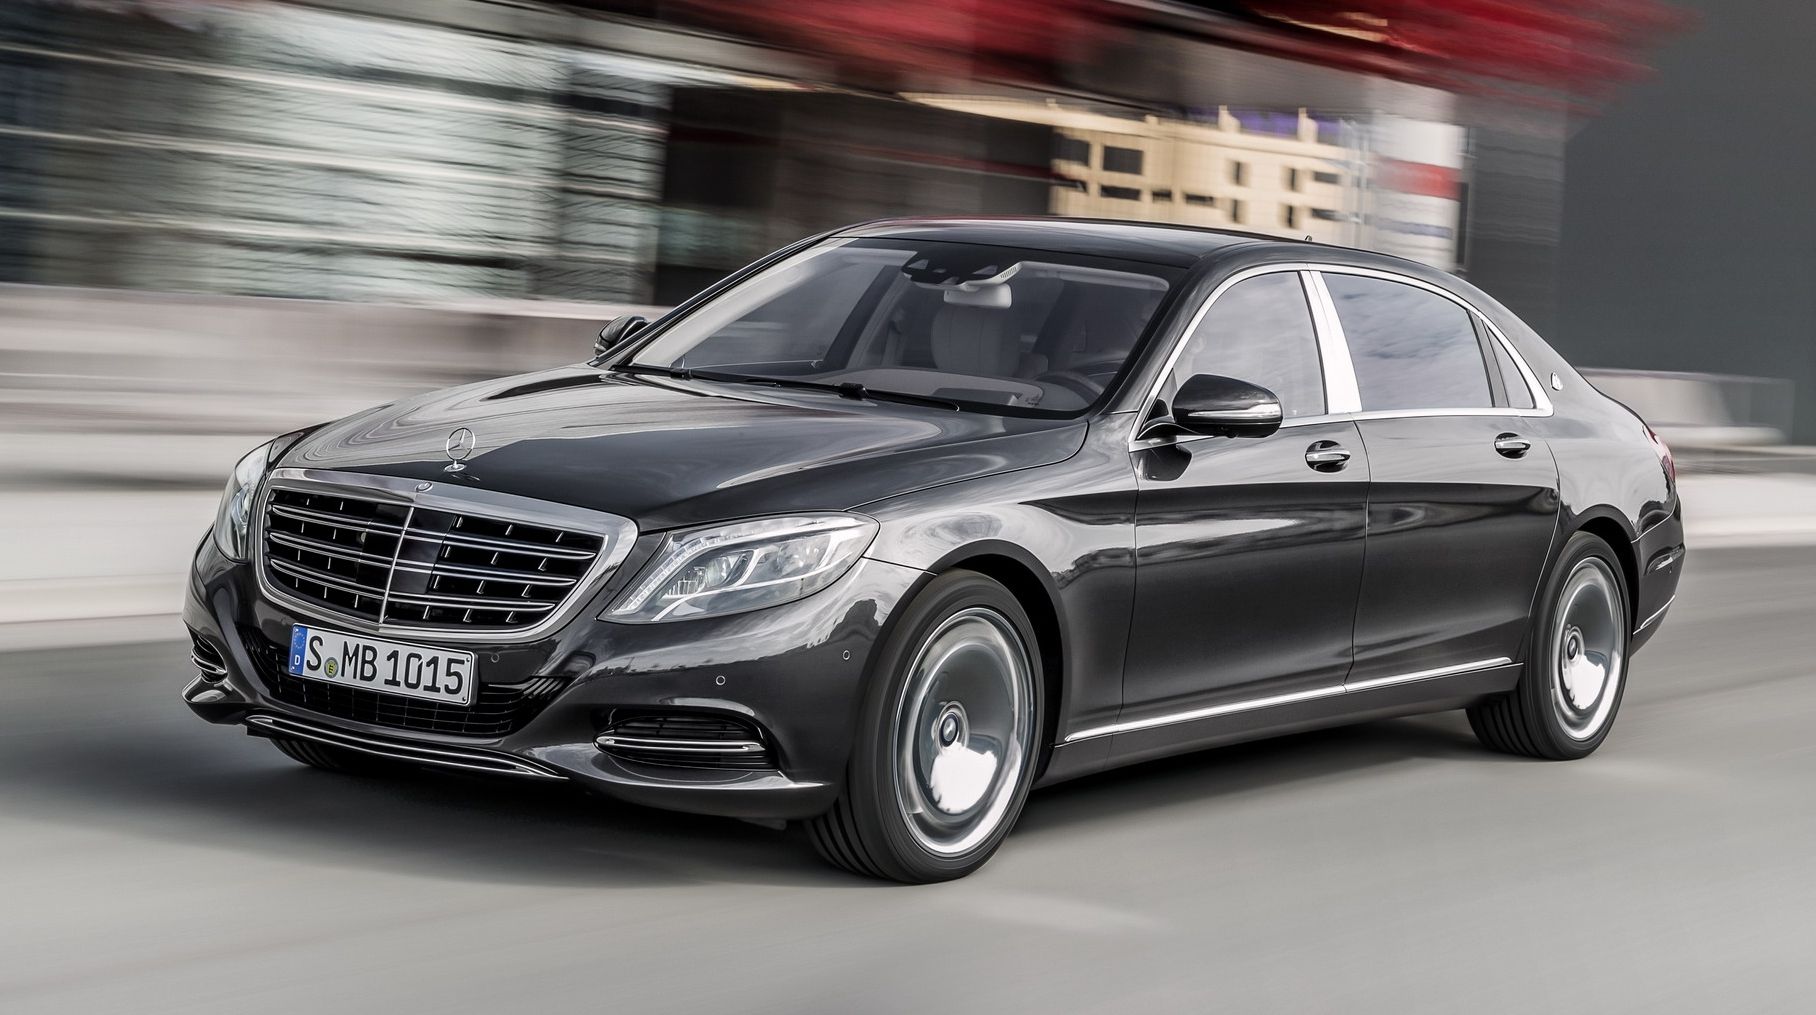  Mercedes-Benz has finally revealed the European pricing for the new Mercedes-Maybach S-Class. 